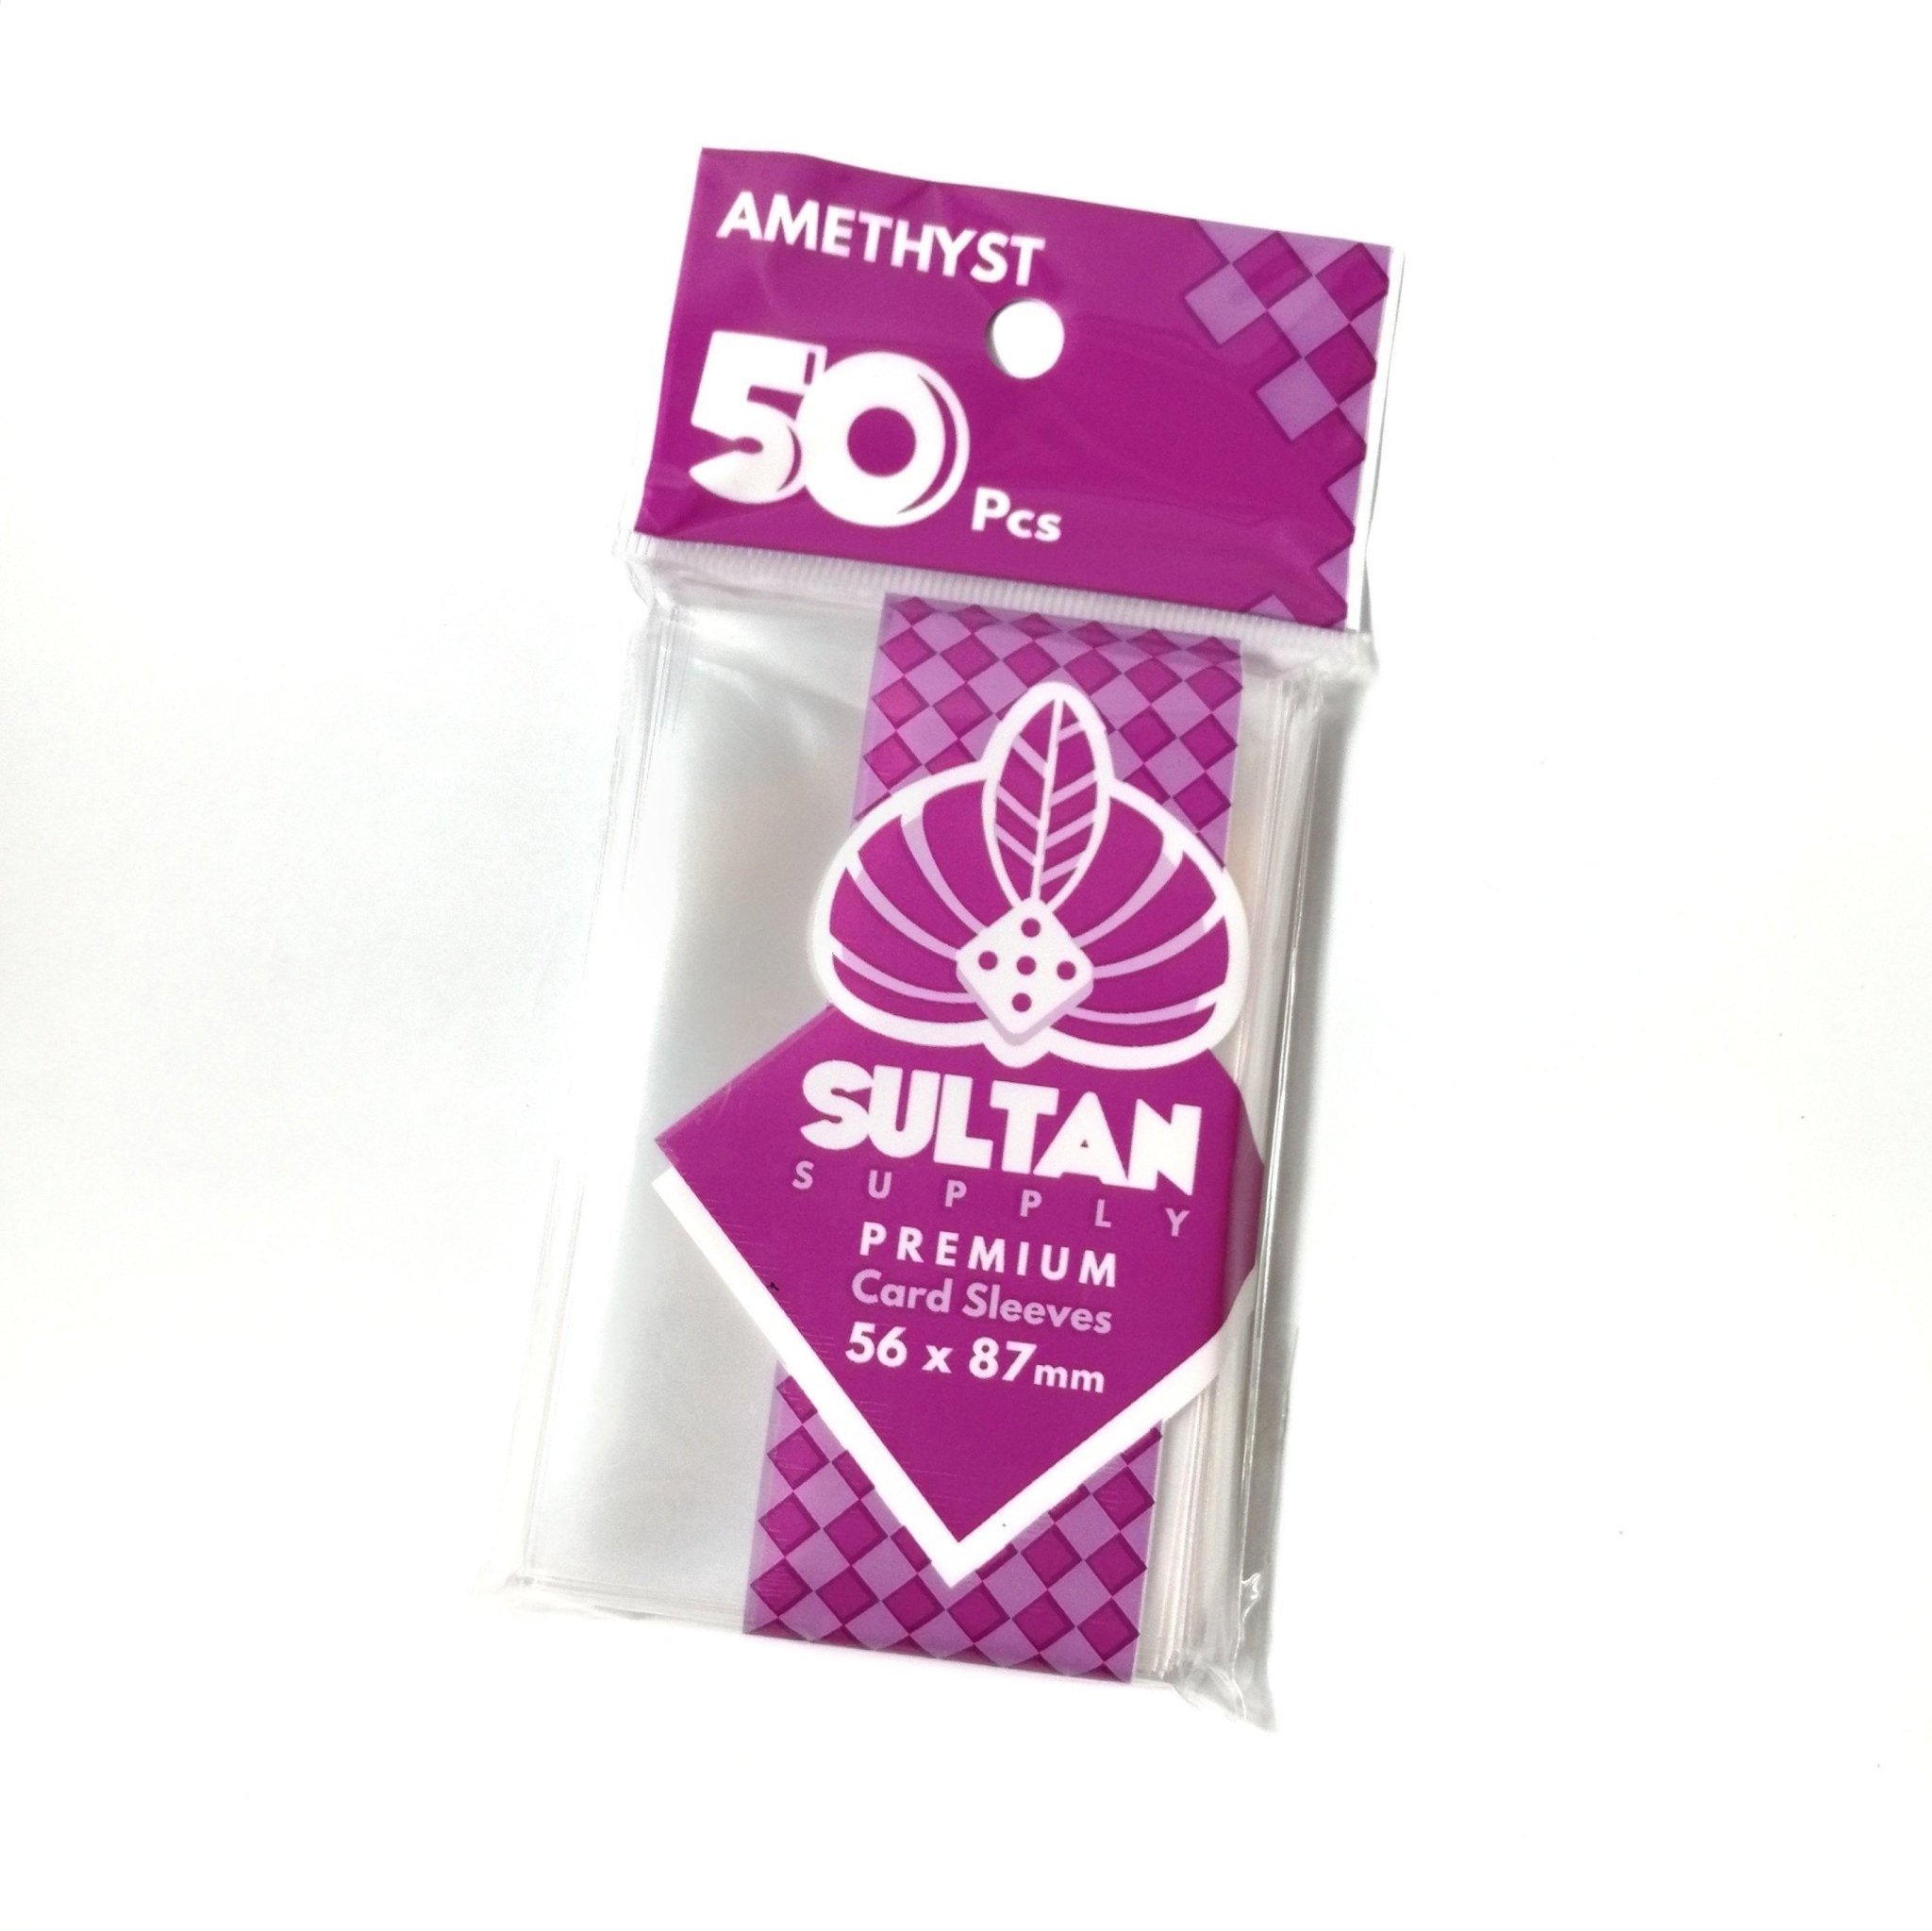 Sultan Supply Premium Card Sleeves: 56 x 87 mm Standard USA Amethyst (90 microns) - Gaming Library